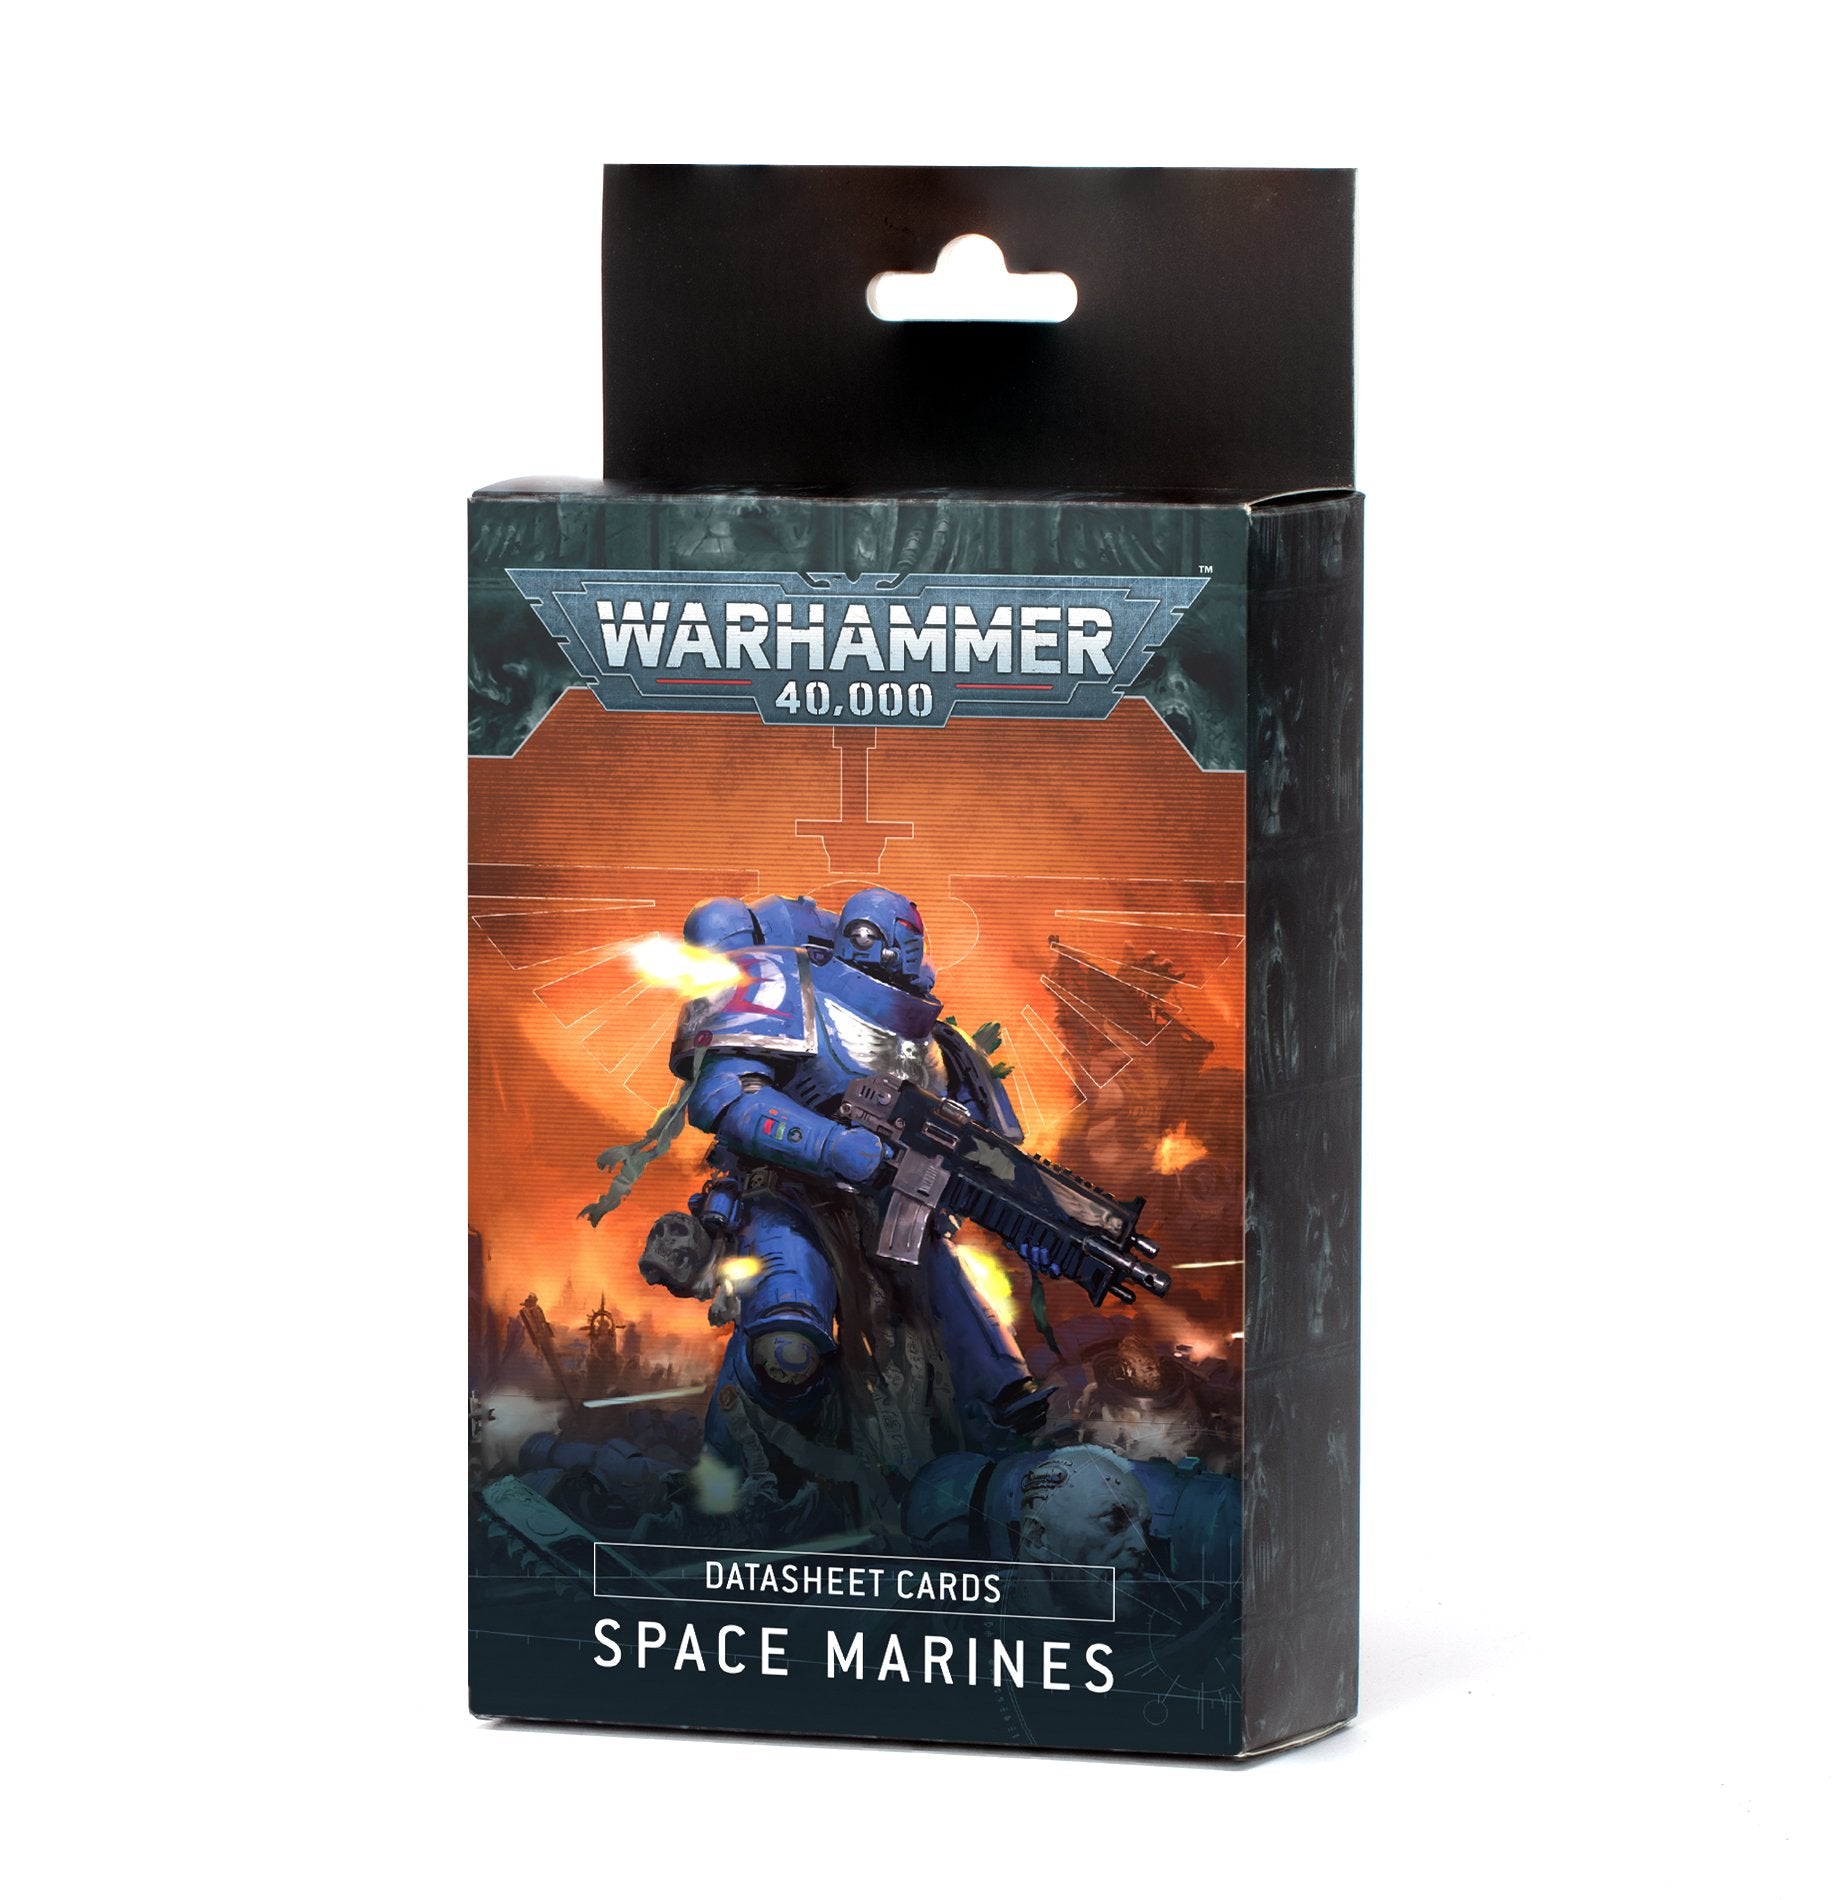 WH40K DATASHEET CARDS: SPACE MARINES | Impulse Games and Hobbies